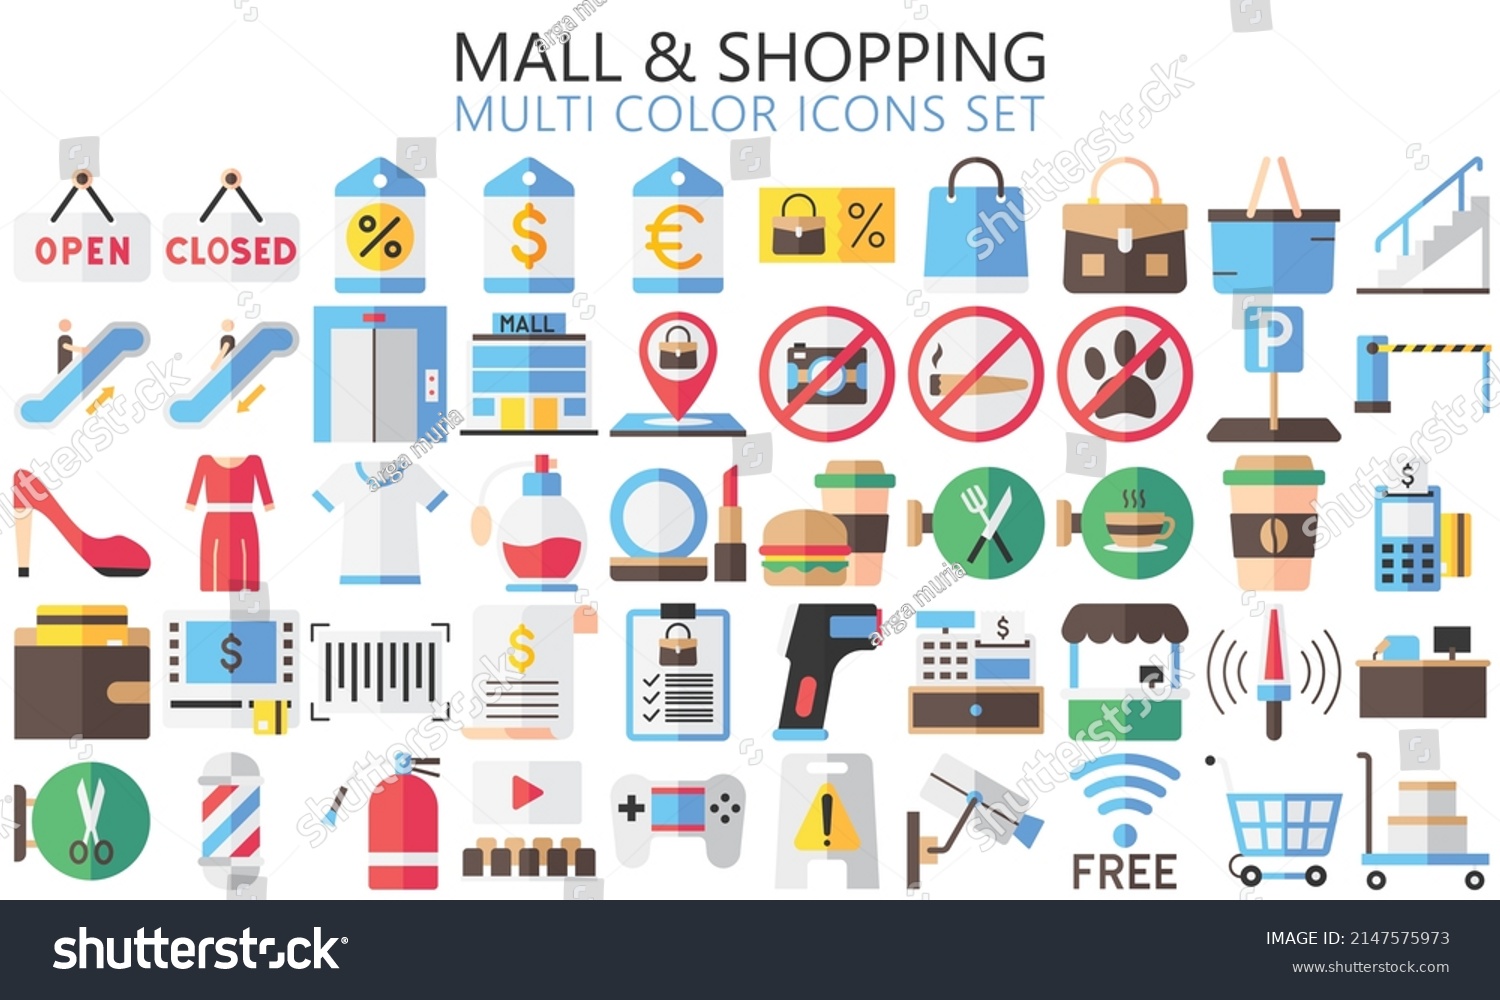 SVG of Market Shopping mall, retail, multi color icons set with sale, offer and payment symbols. Outline icons collection. Used for web, UI, UX kit and applications, vector EPS 10 ready convert to SVG svg